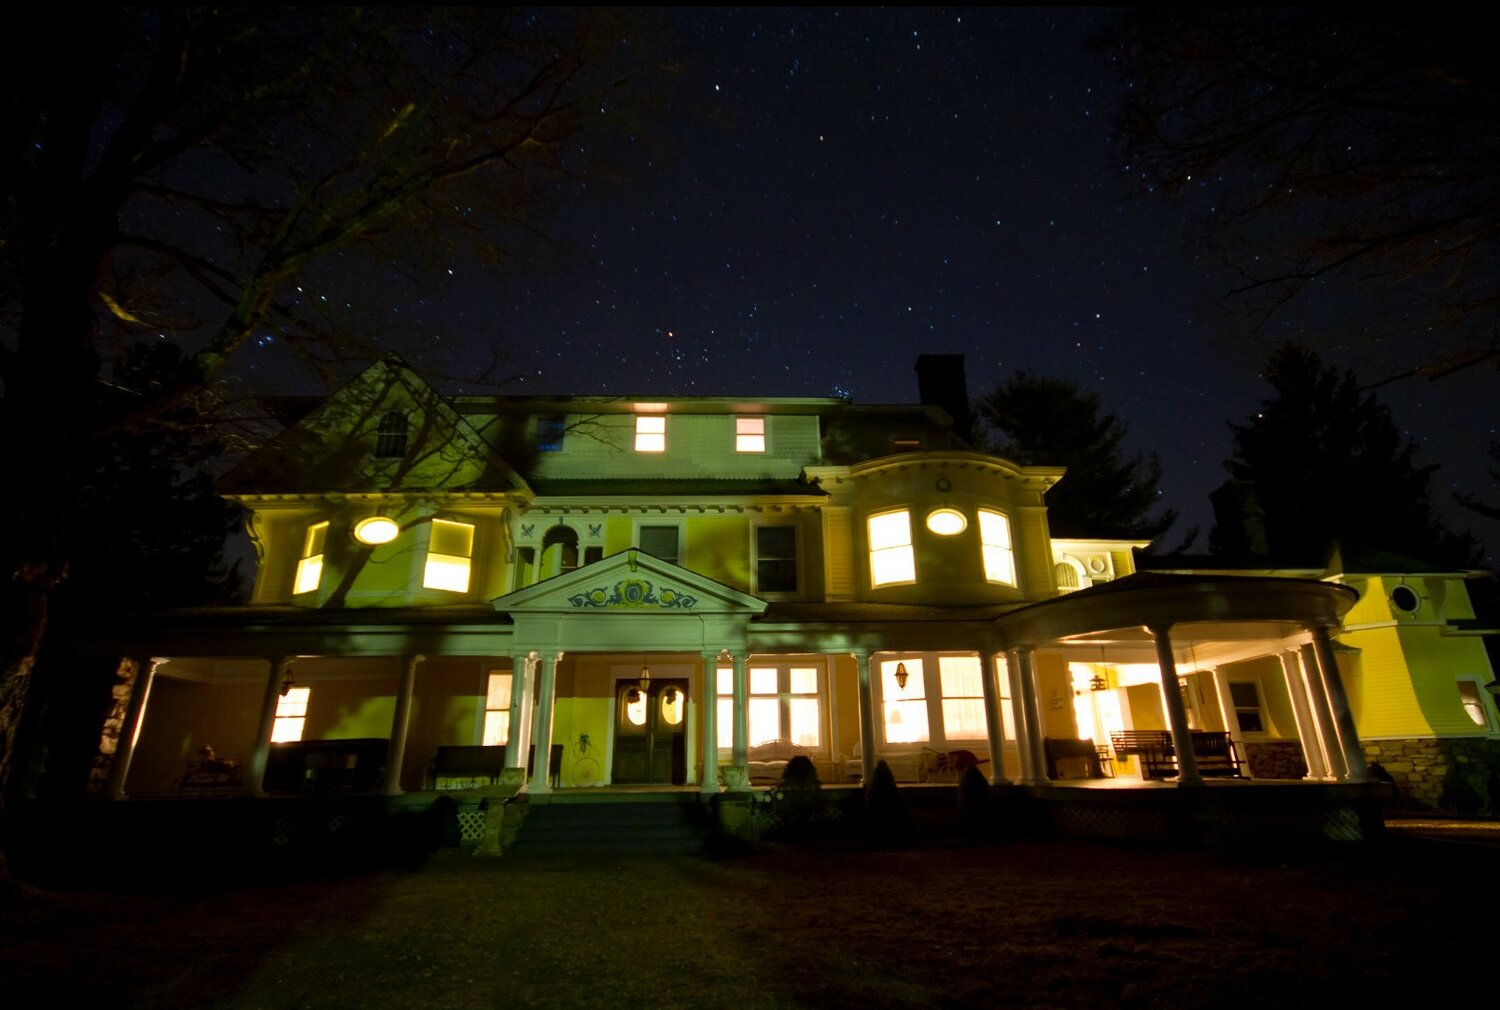 At Burn Brae Mansion, it's basically Halloween all year round. Ghosts have been spotted in the 116-year-old house.